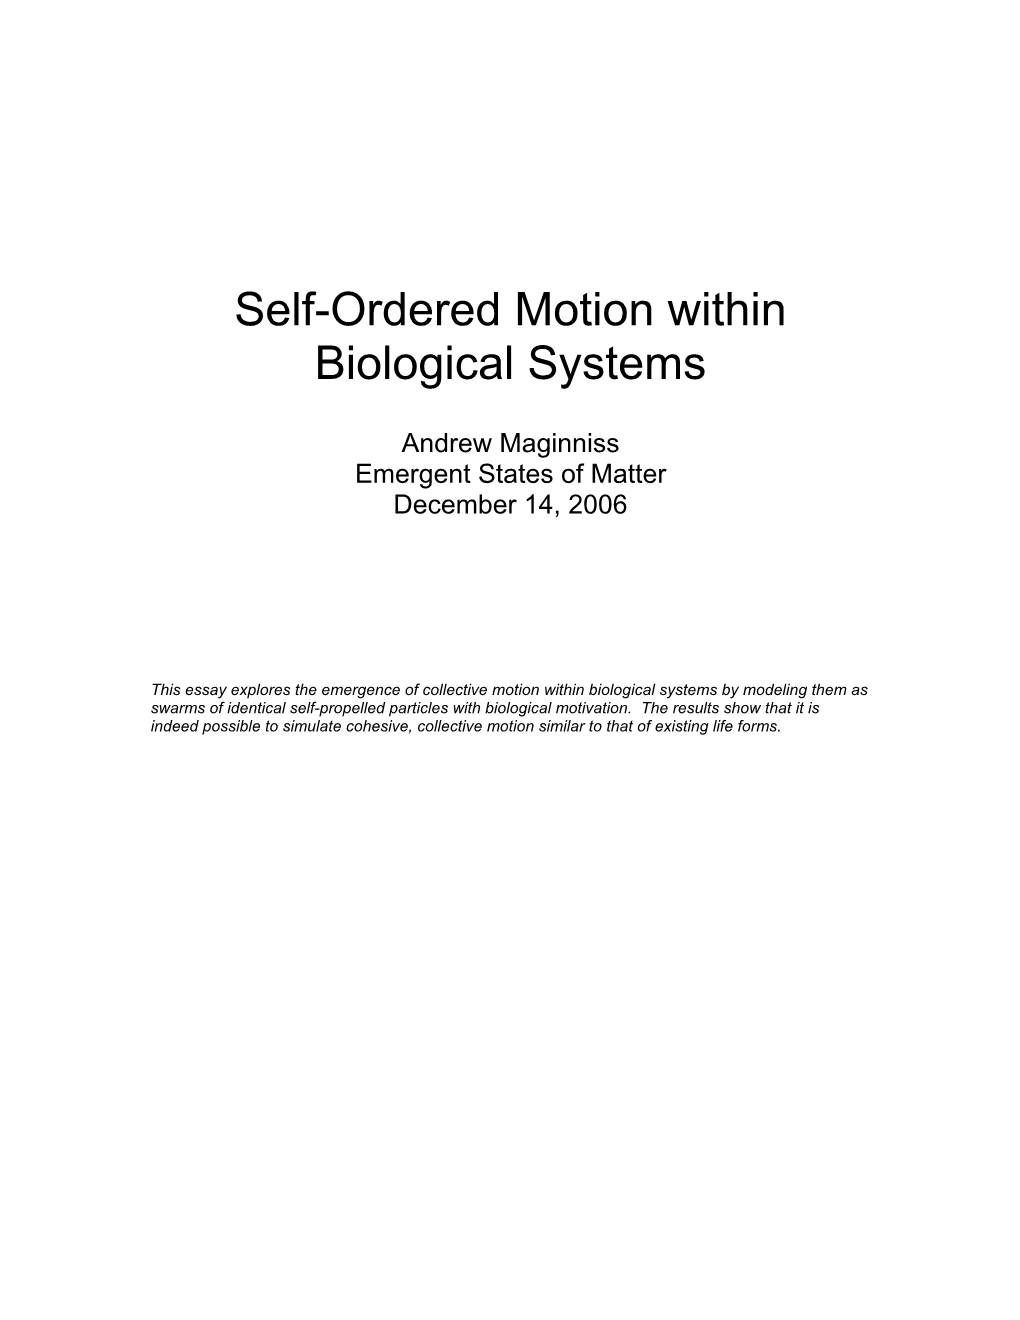 Self-Ordered Motion Within Biological Systems